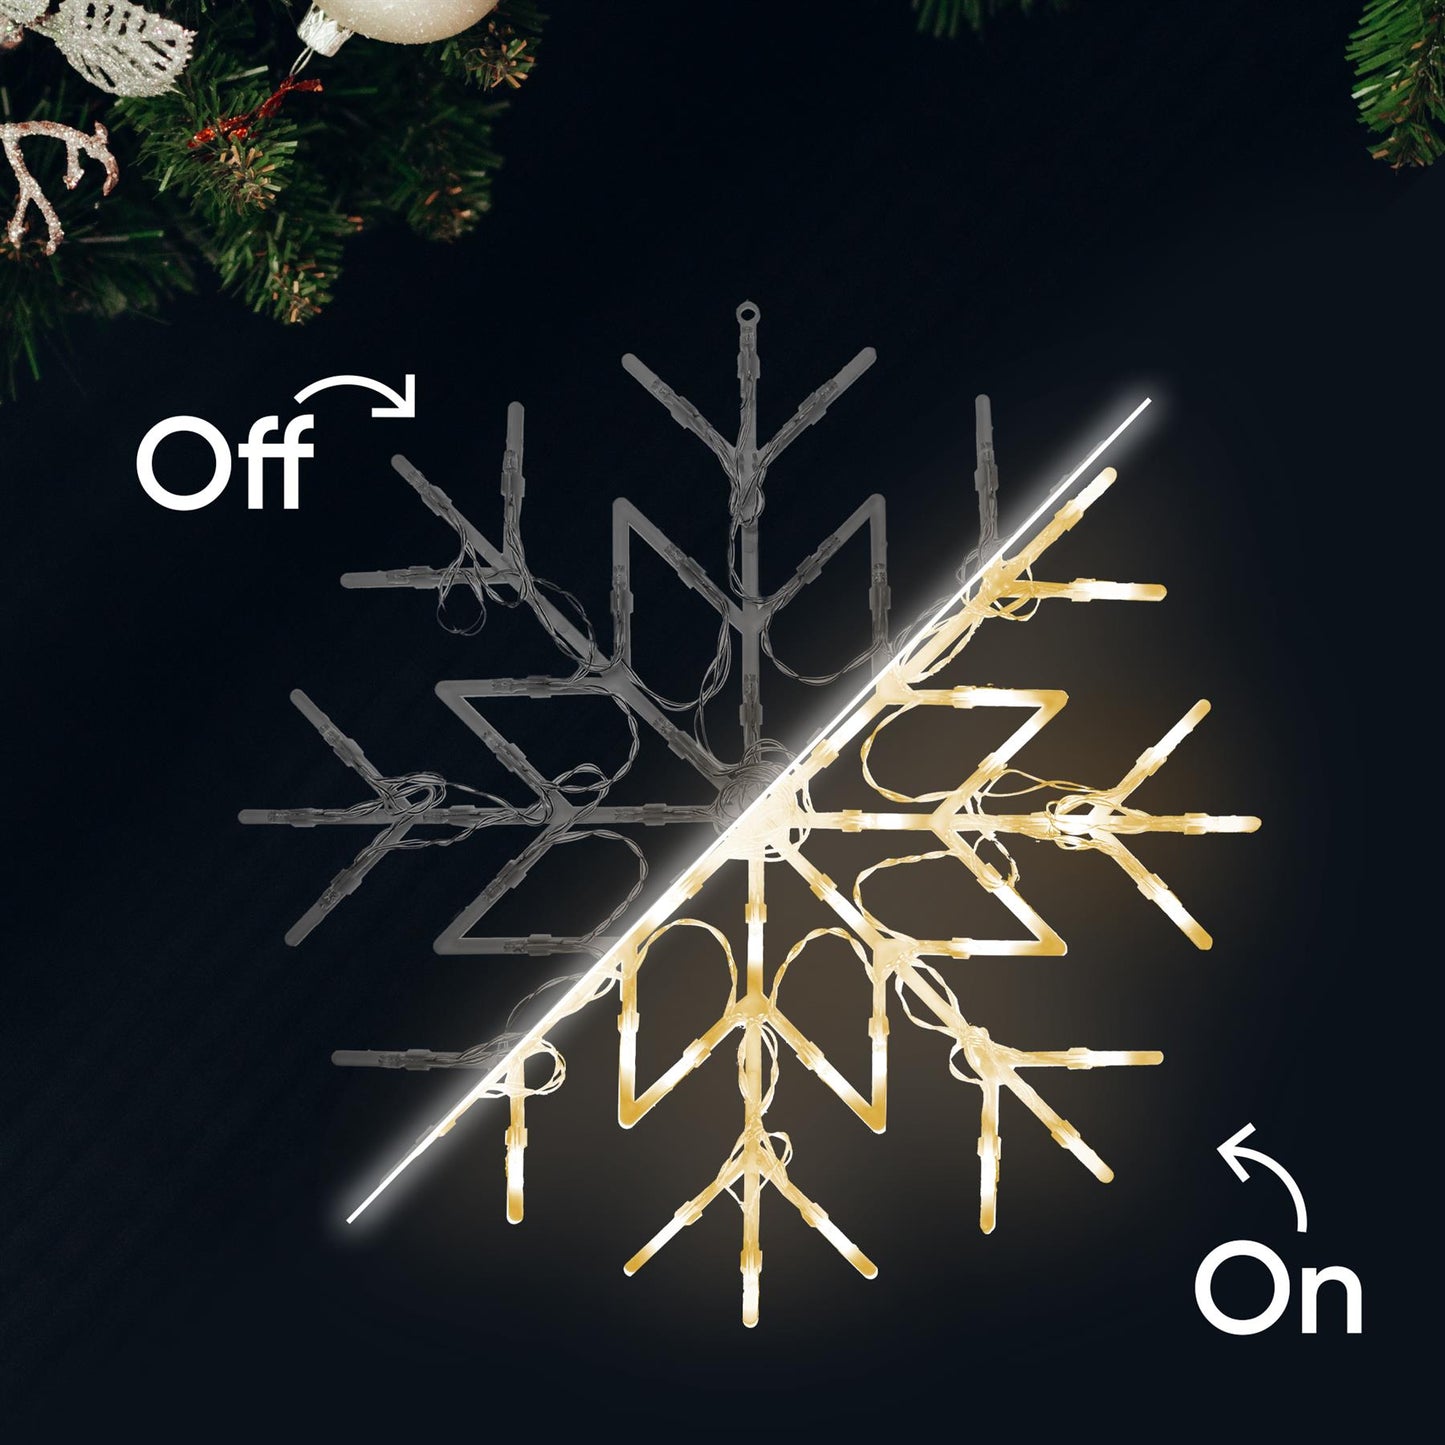 Twinkle Up Your Christmas Decor with 50 LED Snowflakes